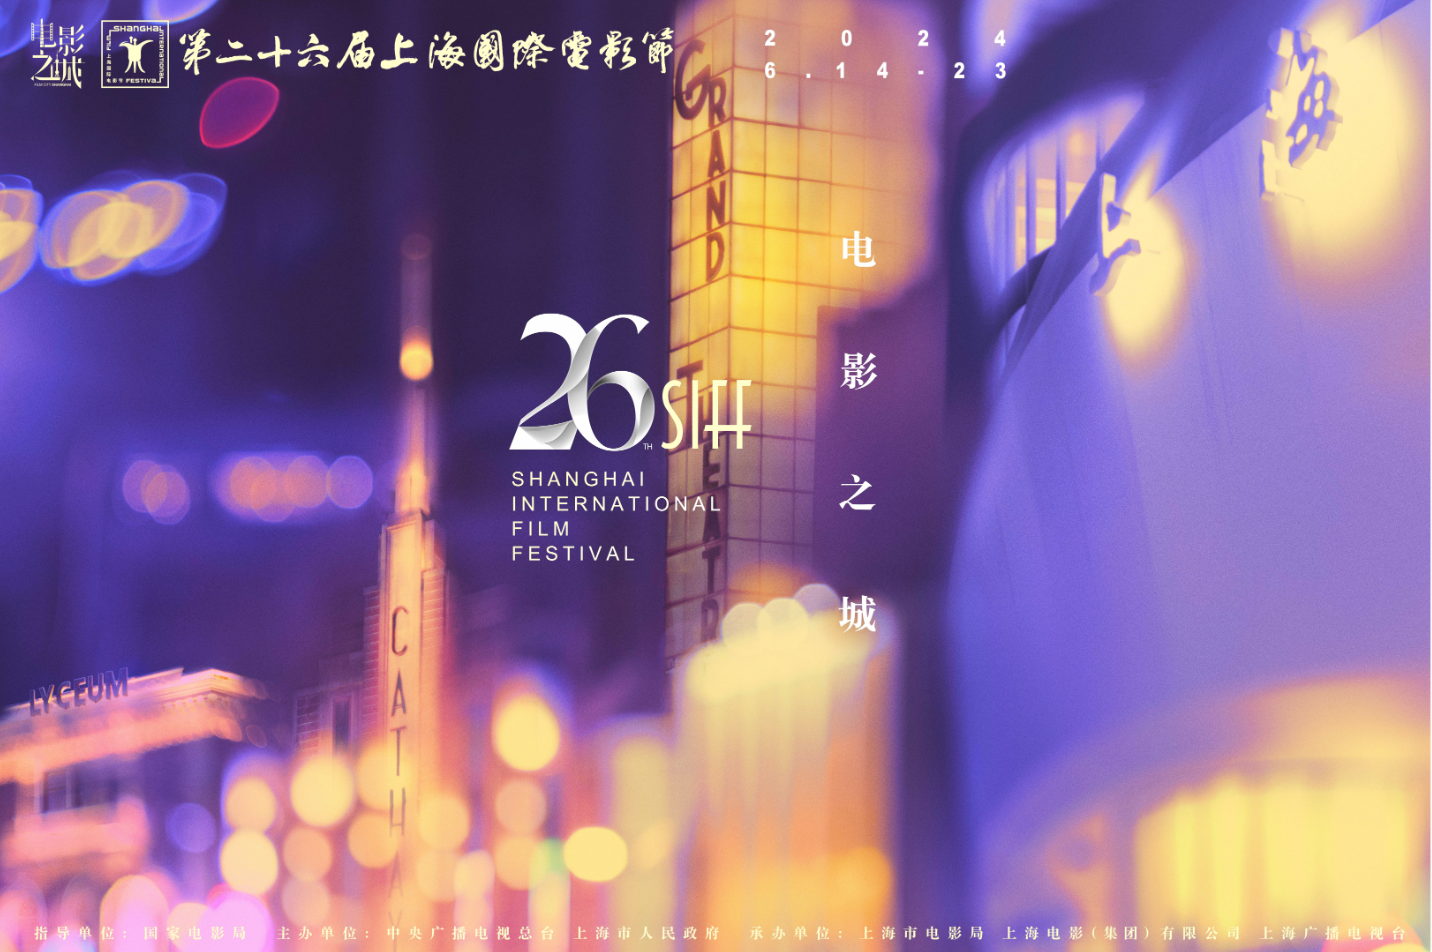 The official poster of the 26th Shanghai International Film Festival. /SIFF